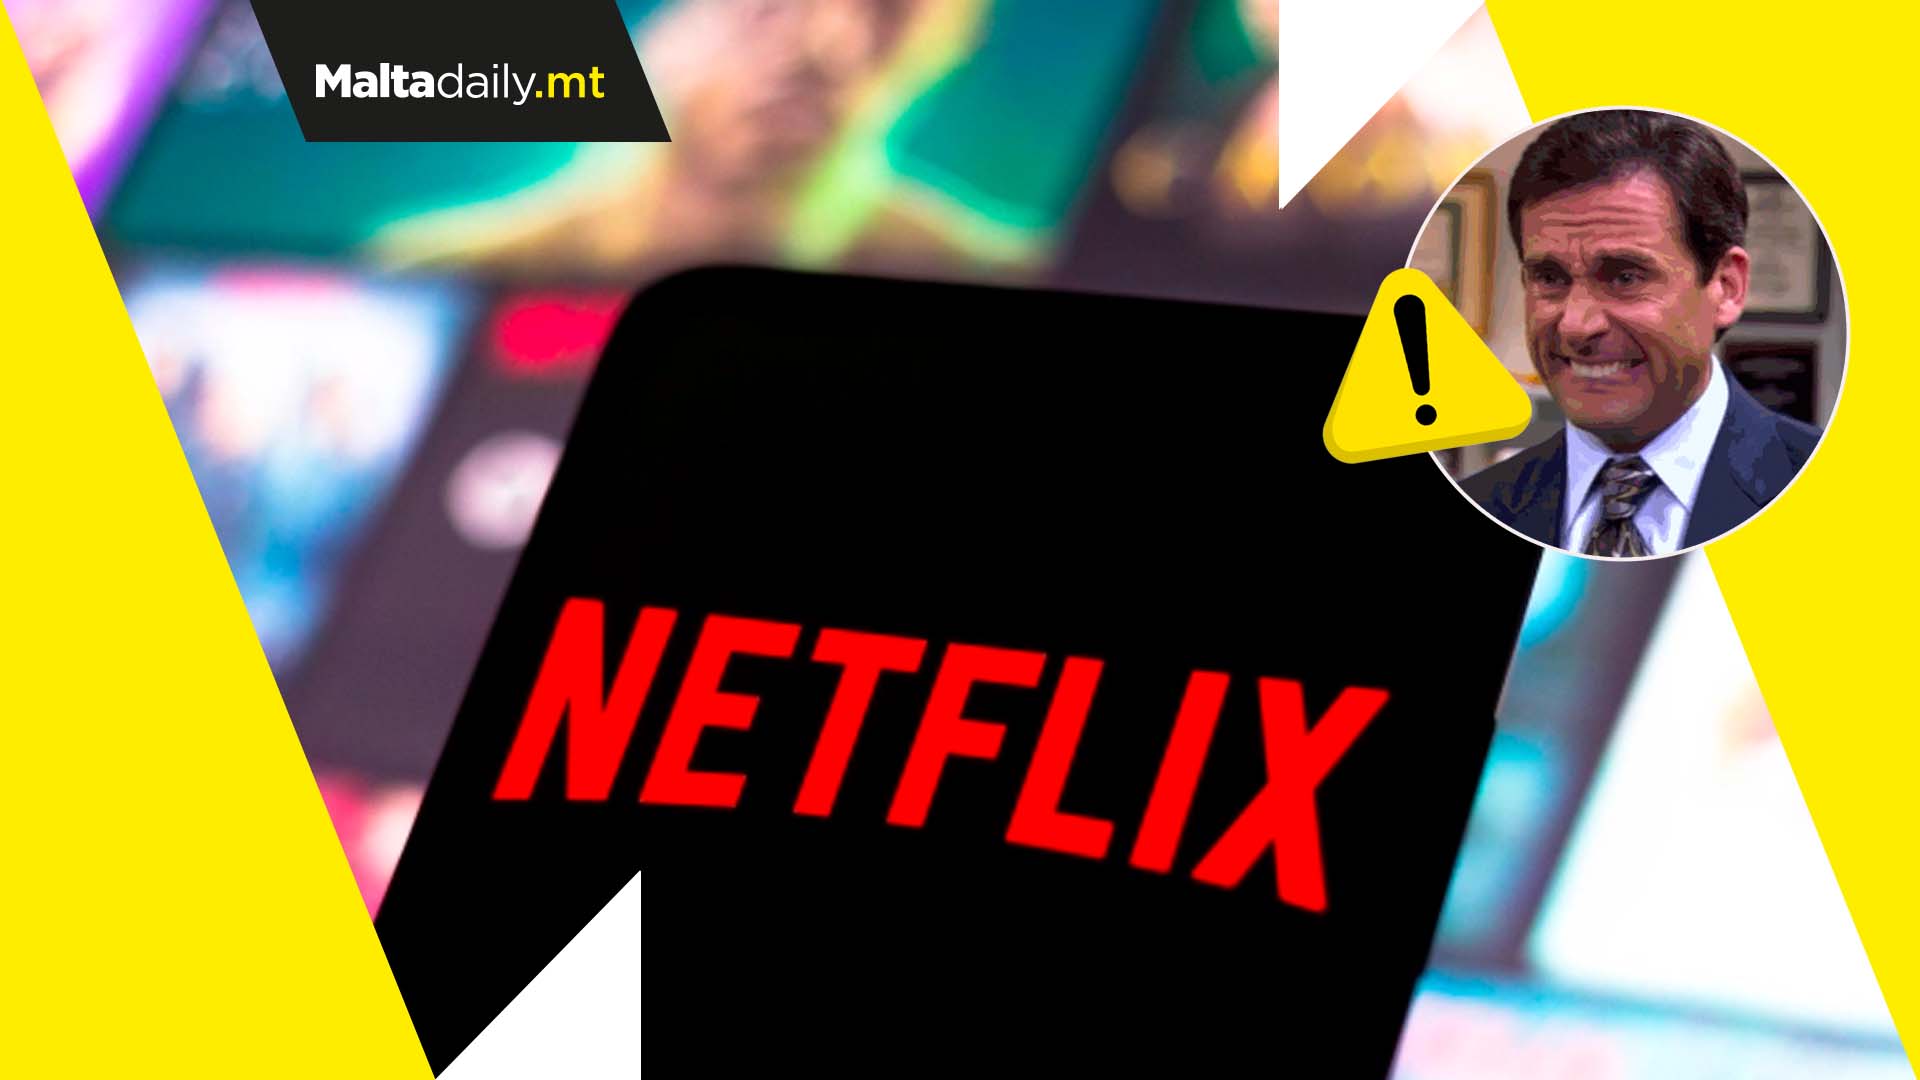 Netflix is planning to introduce adverts after subscriber drop